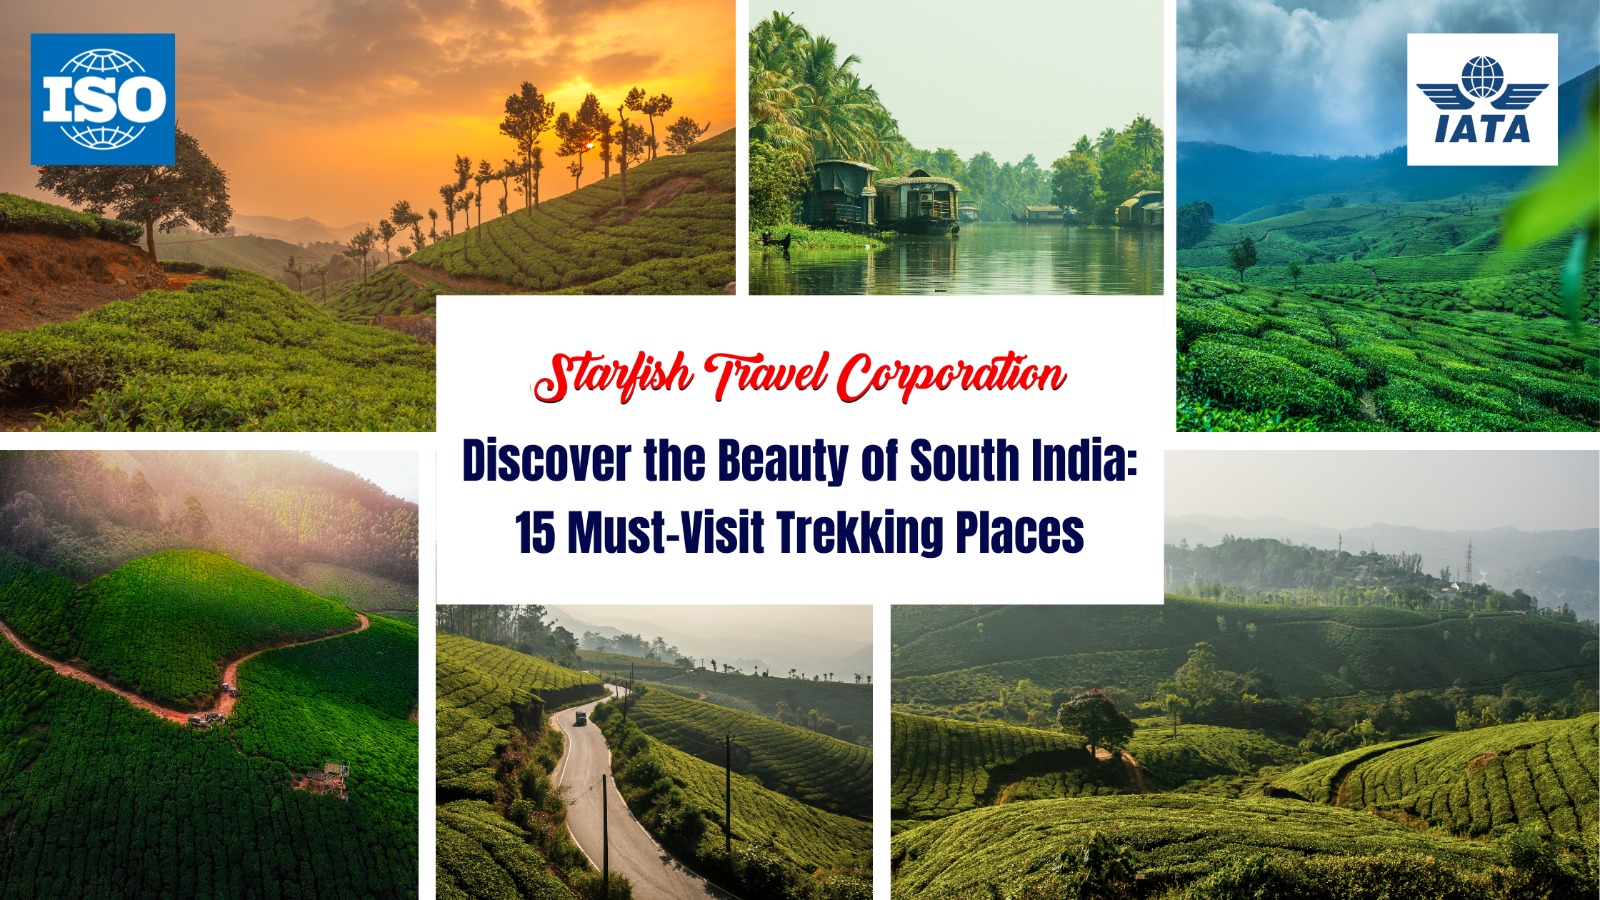 Discover the Beauty of South India 15 Must-Visit Trekking Places